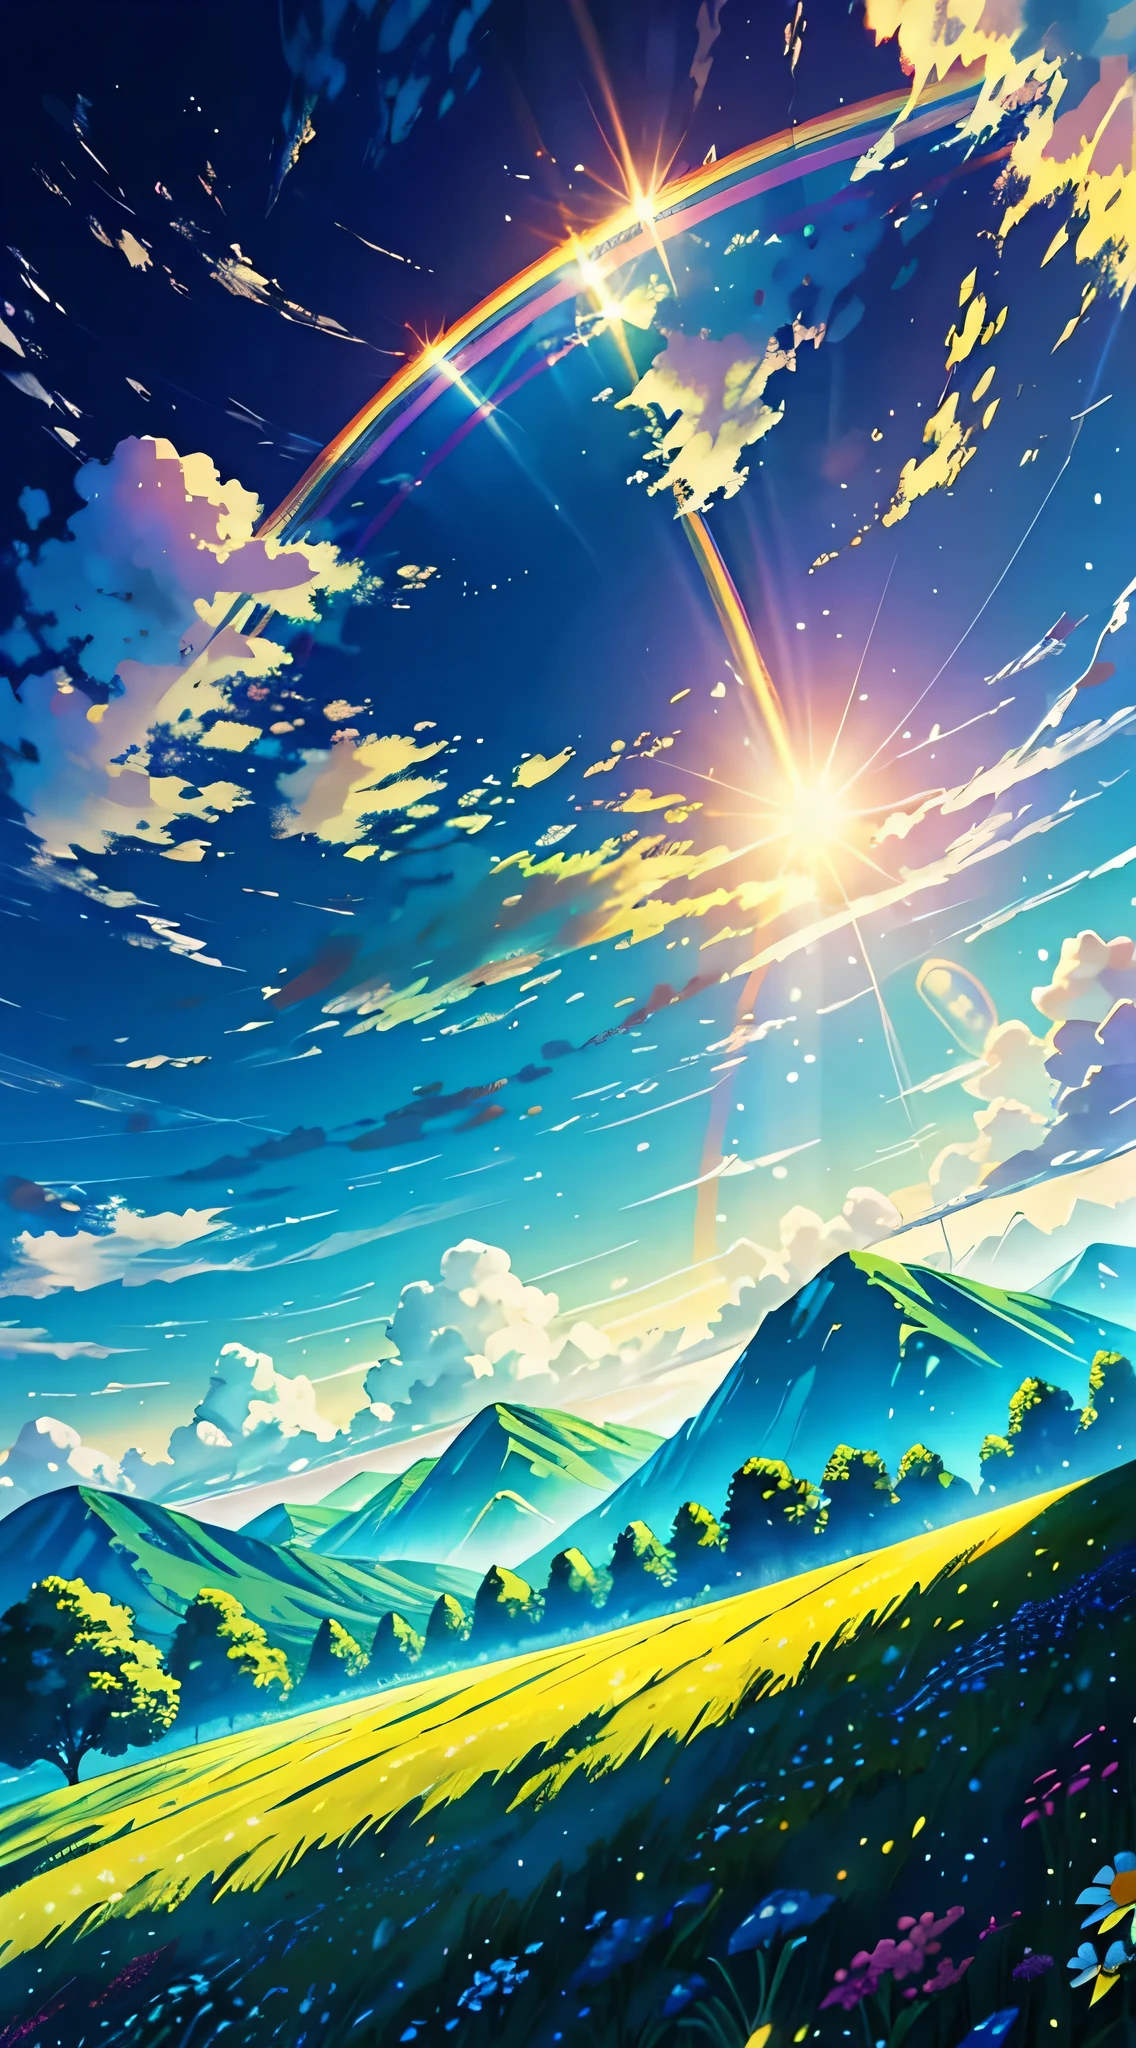 (from below, the sky is higher, Open the fields below), blue sky, White clouds, Sun, Sunlight, spheres, mountains, green trees, butterfly, grassy fields, flowers, wind, Sunshine, (dynamic composition: 1.4), Rich Details, saturated color, (rainbow colors: 1.2), (Luminous, Atmospheric lighting), dreamy, magic, tranquility